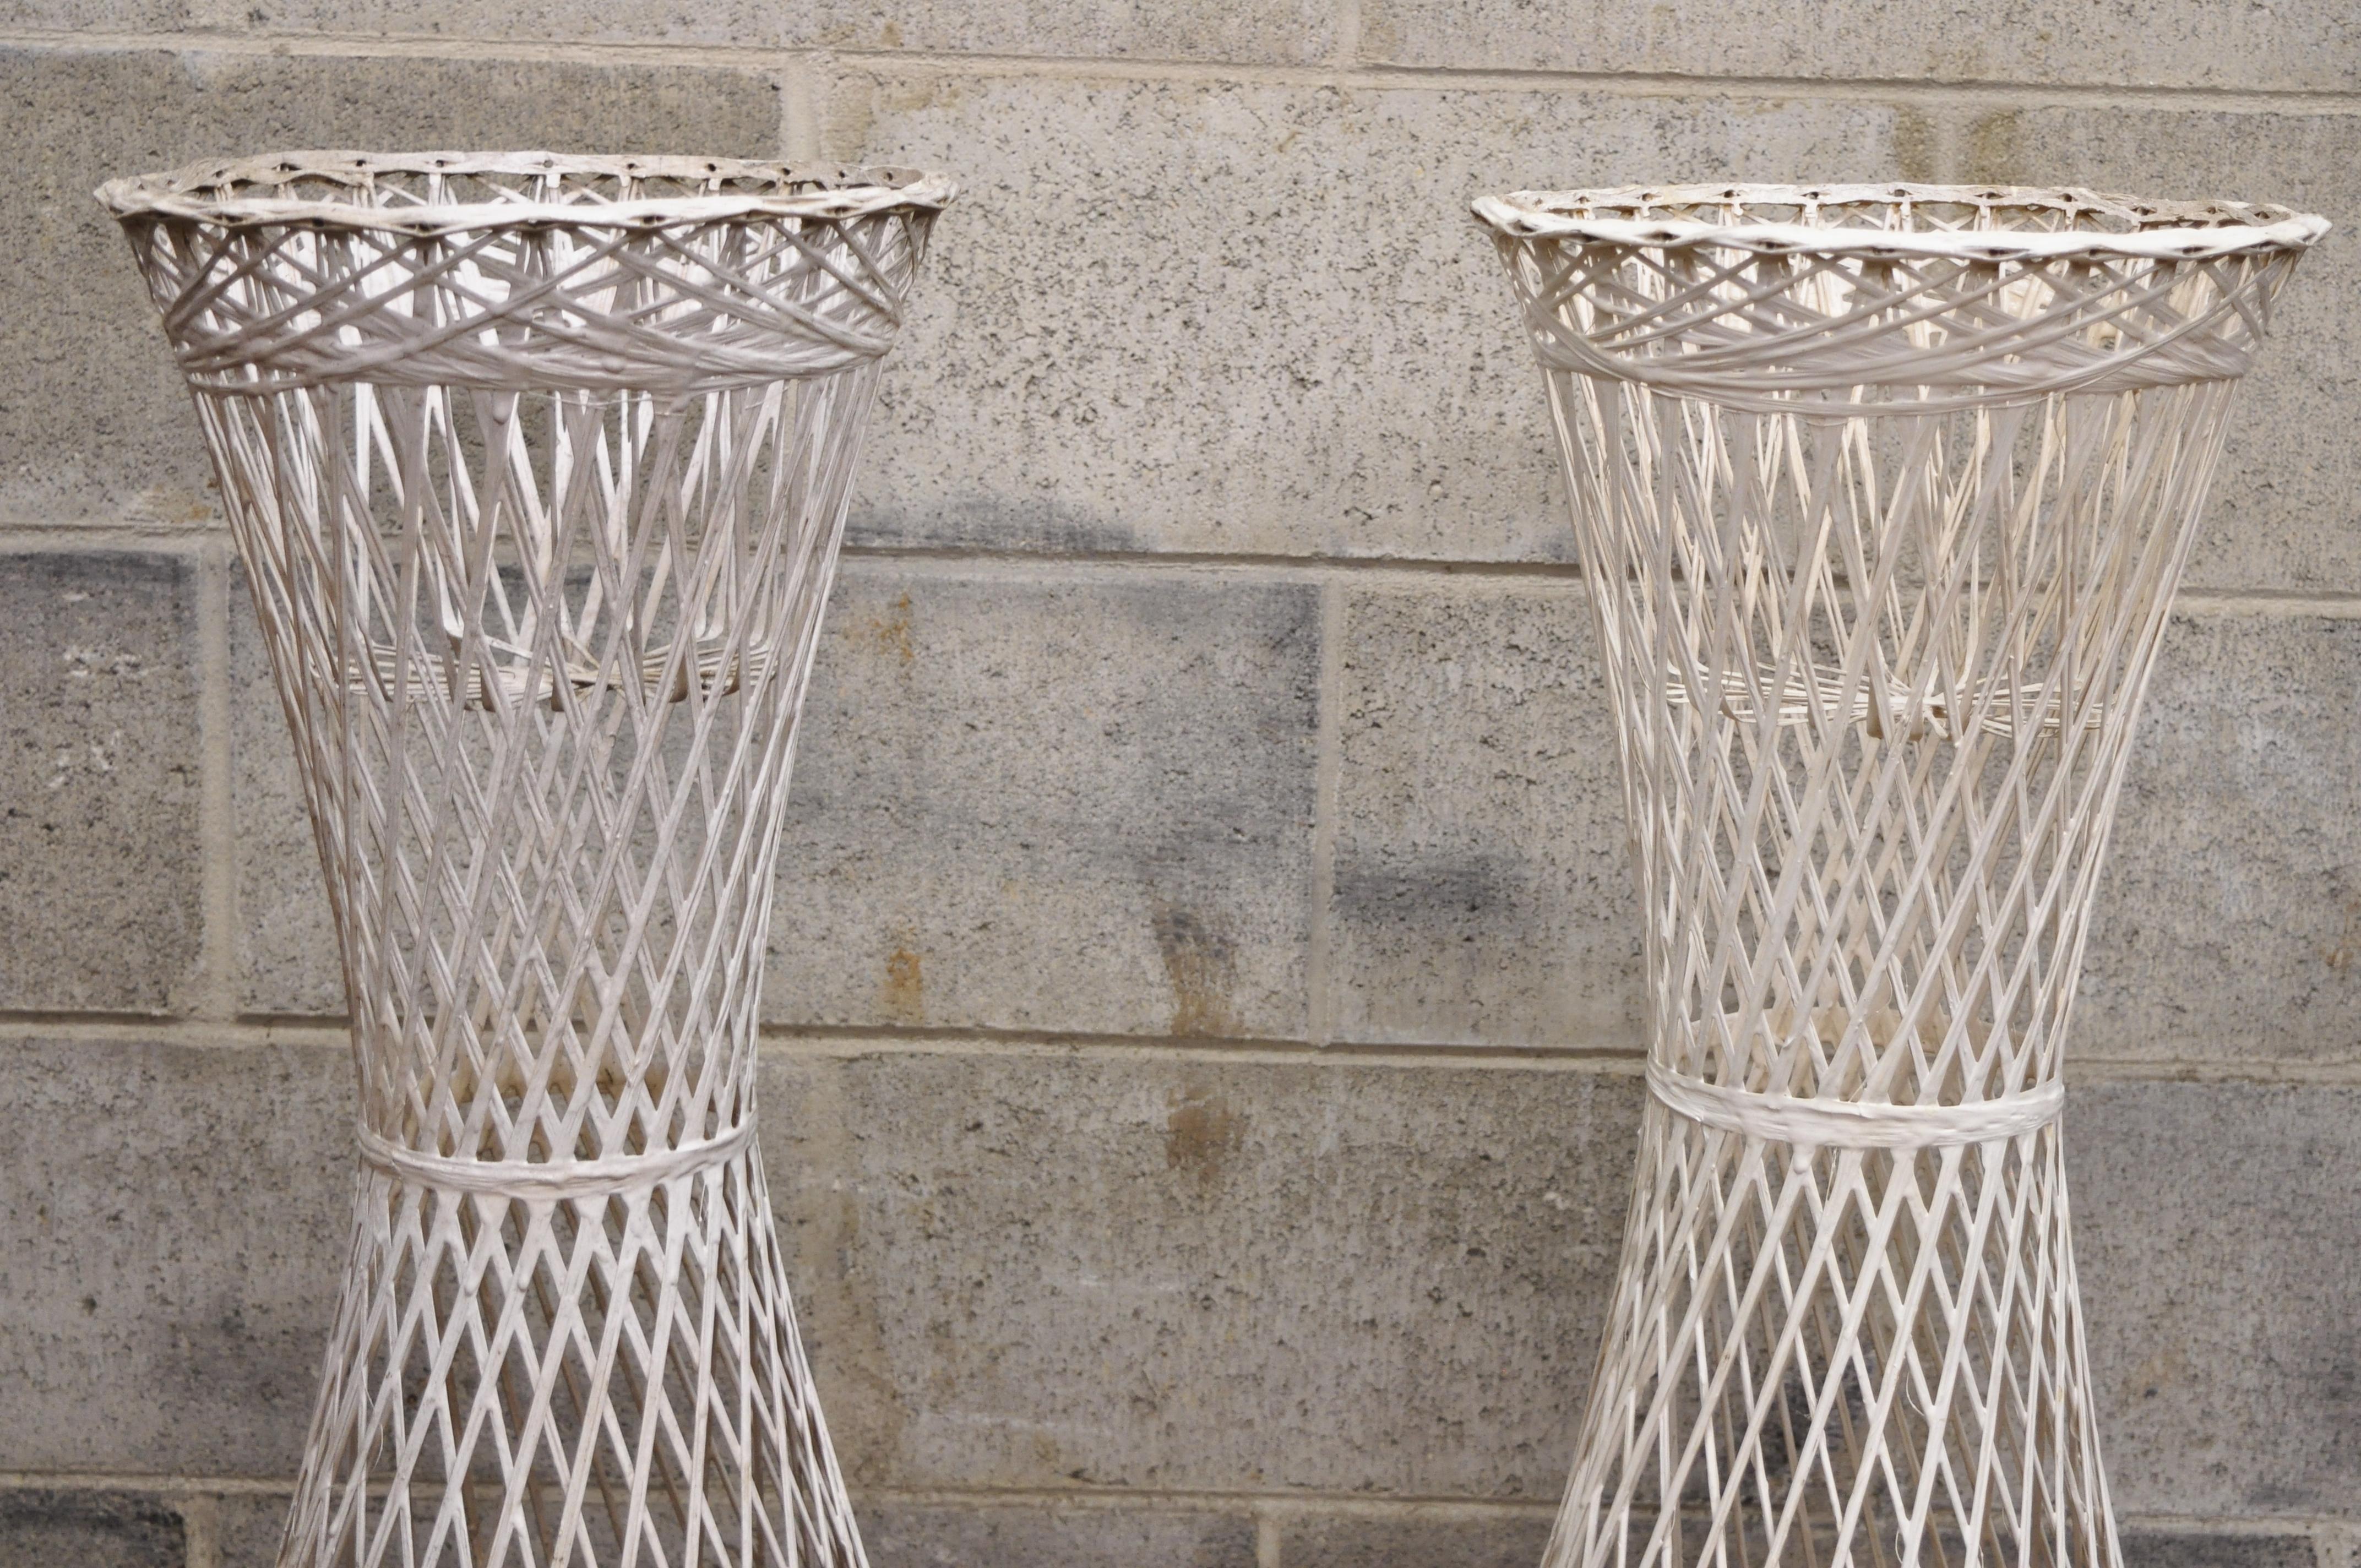 Russell Woodard woven spun fiberglass Mid-Century Modern plant pedestal stands - a pair. Item features woven spun fiberglass, clean modernist lines, quality American craftsmanship, great style and form, circa mid 20th century. Measurements: 30.5